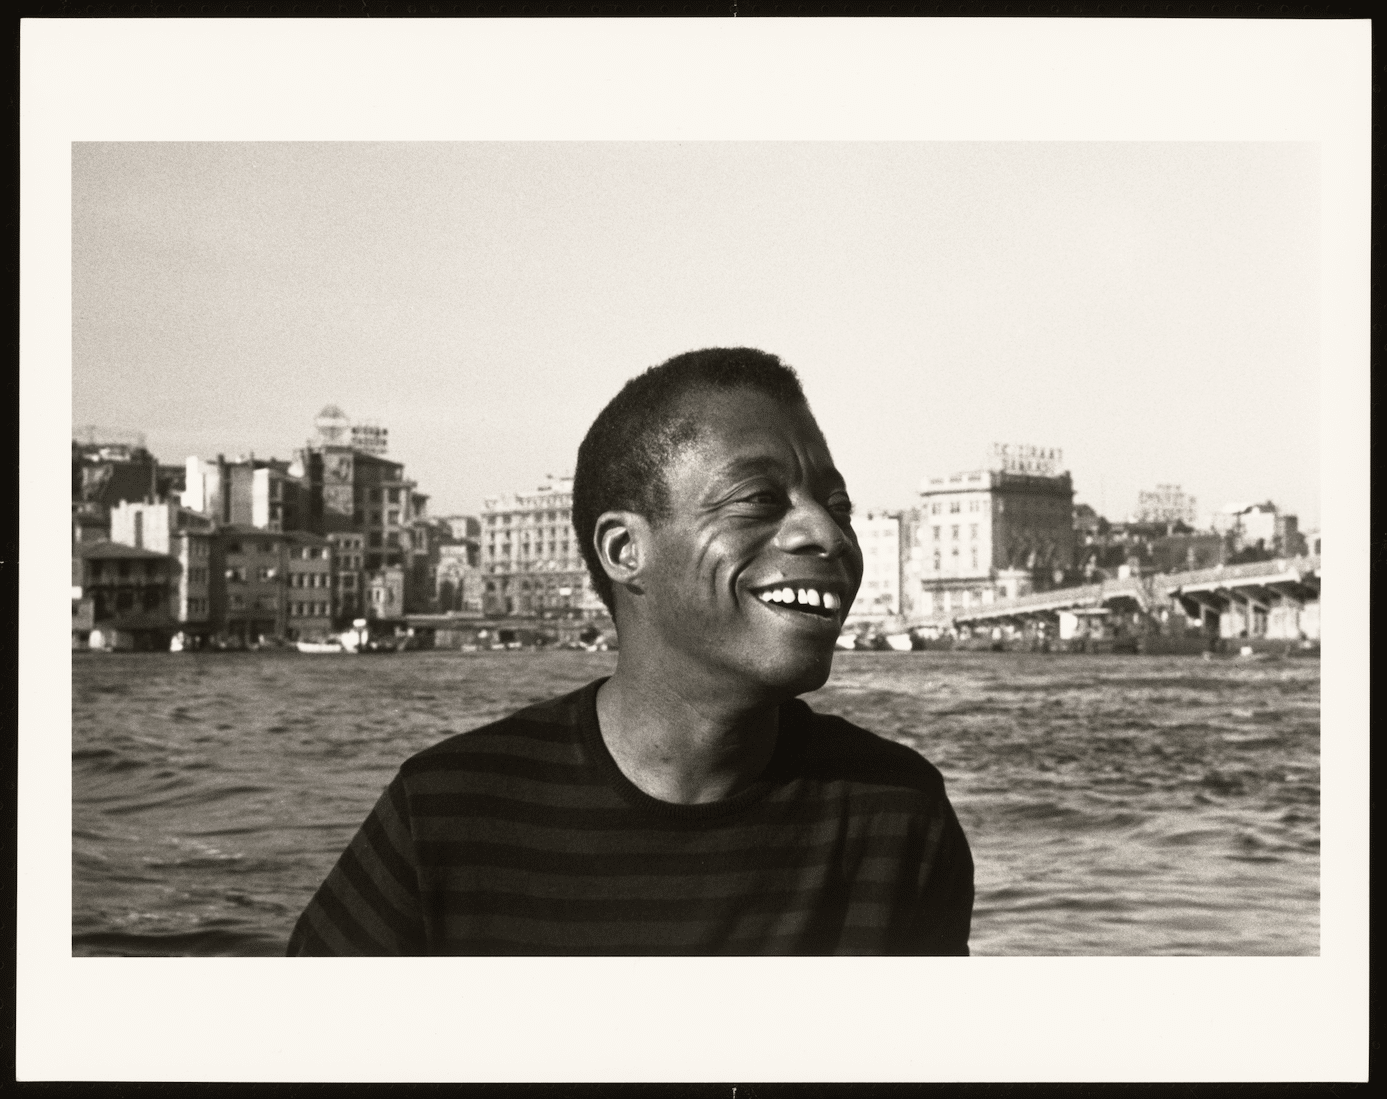 A photo of James Baldwin in a black tshirt with water behind him.